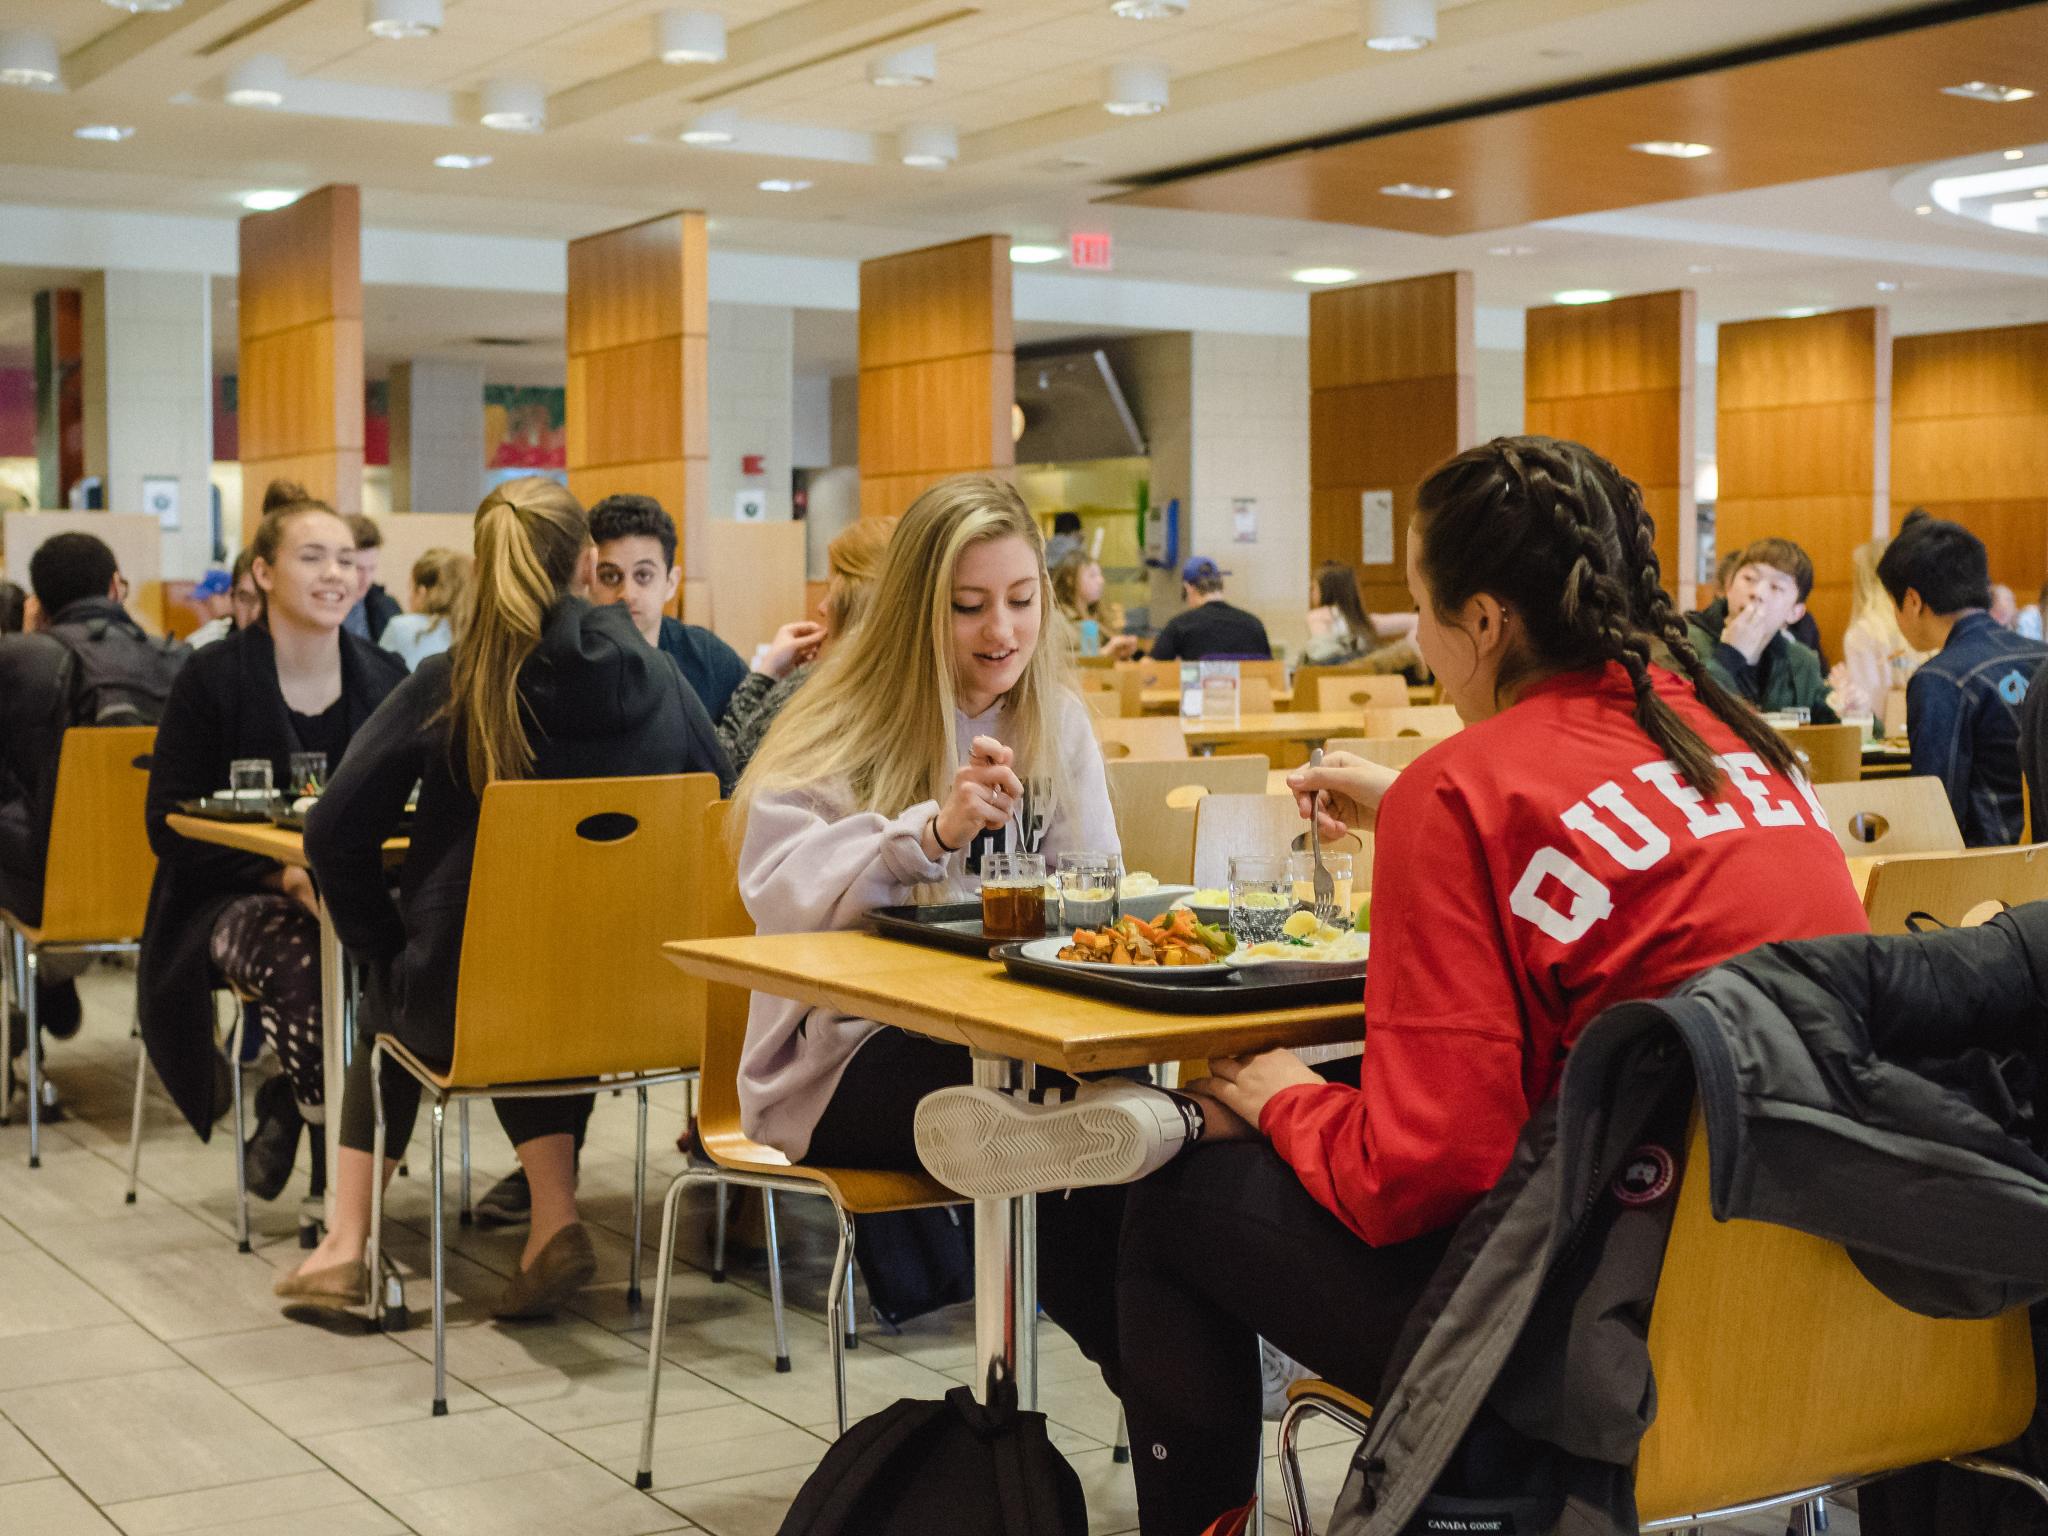 Students sitting in Leonard Dining Hall eating.